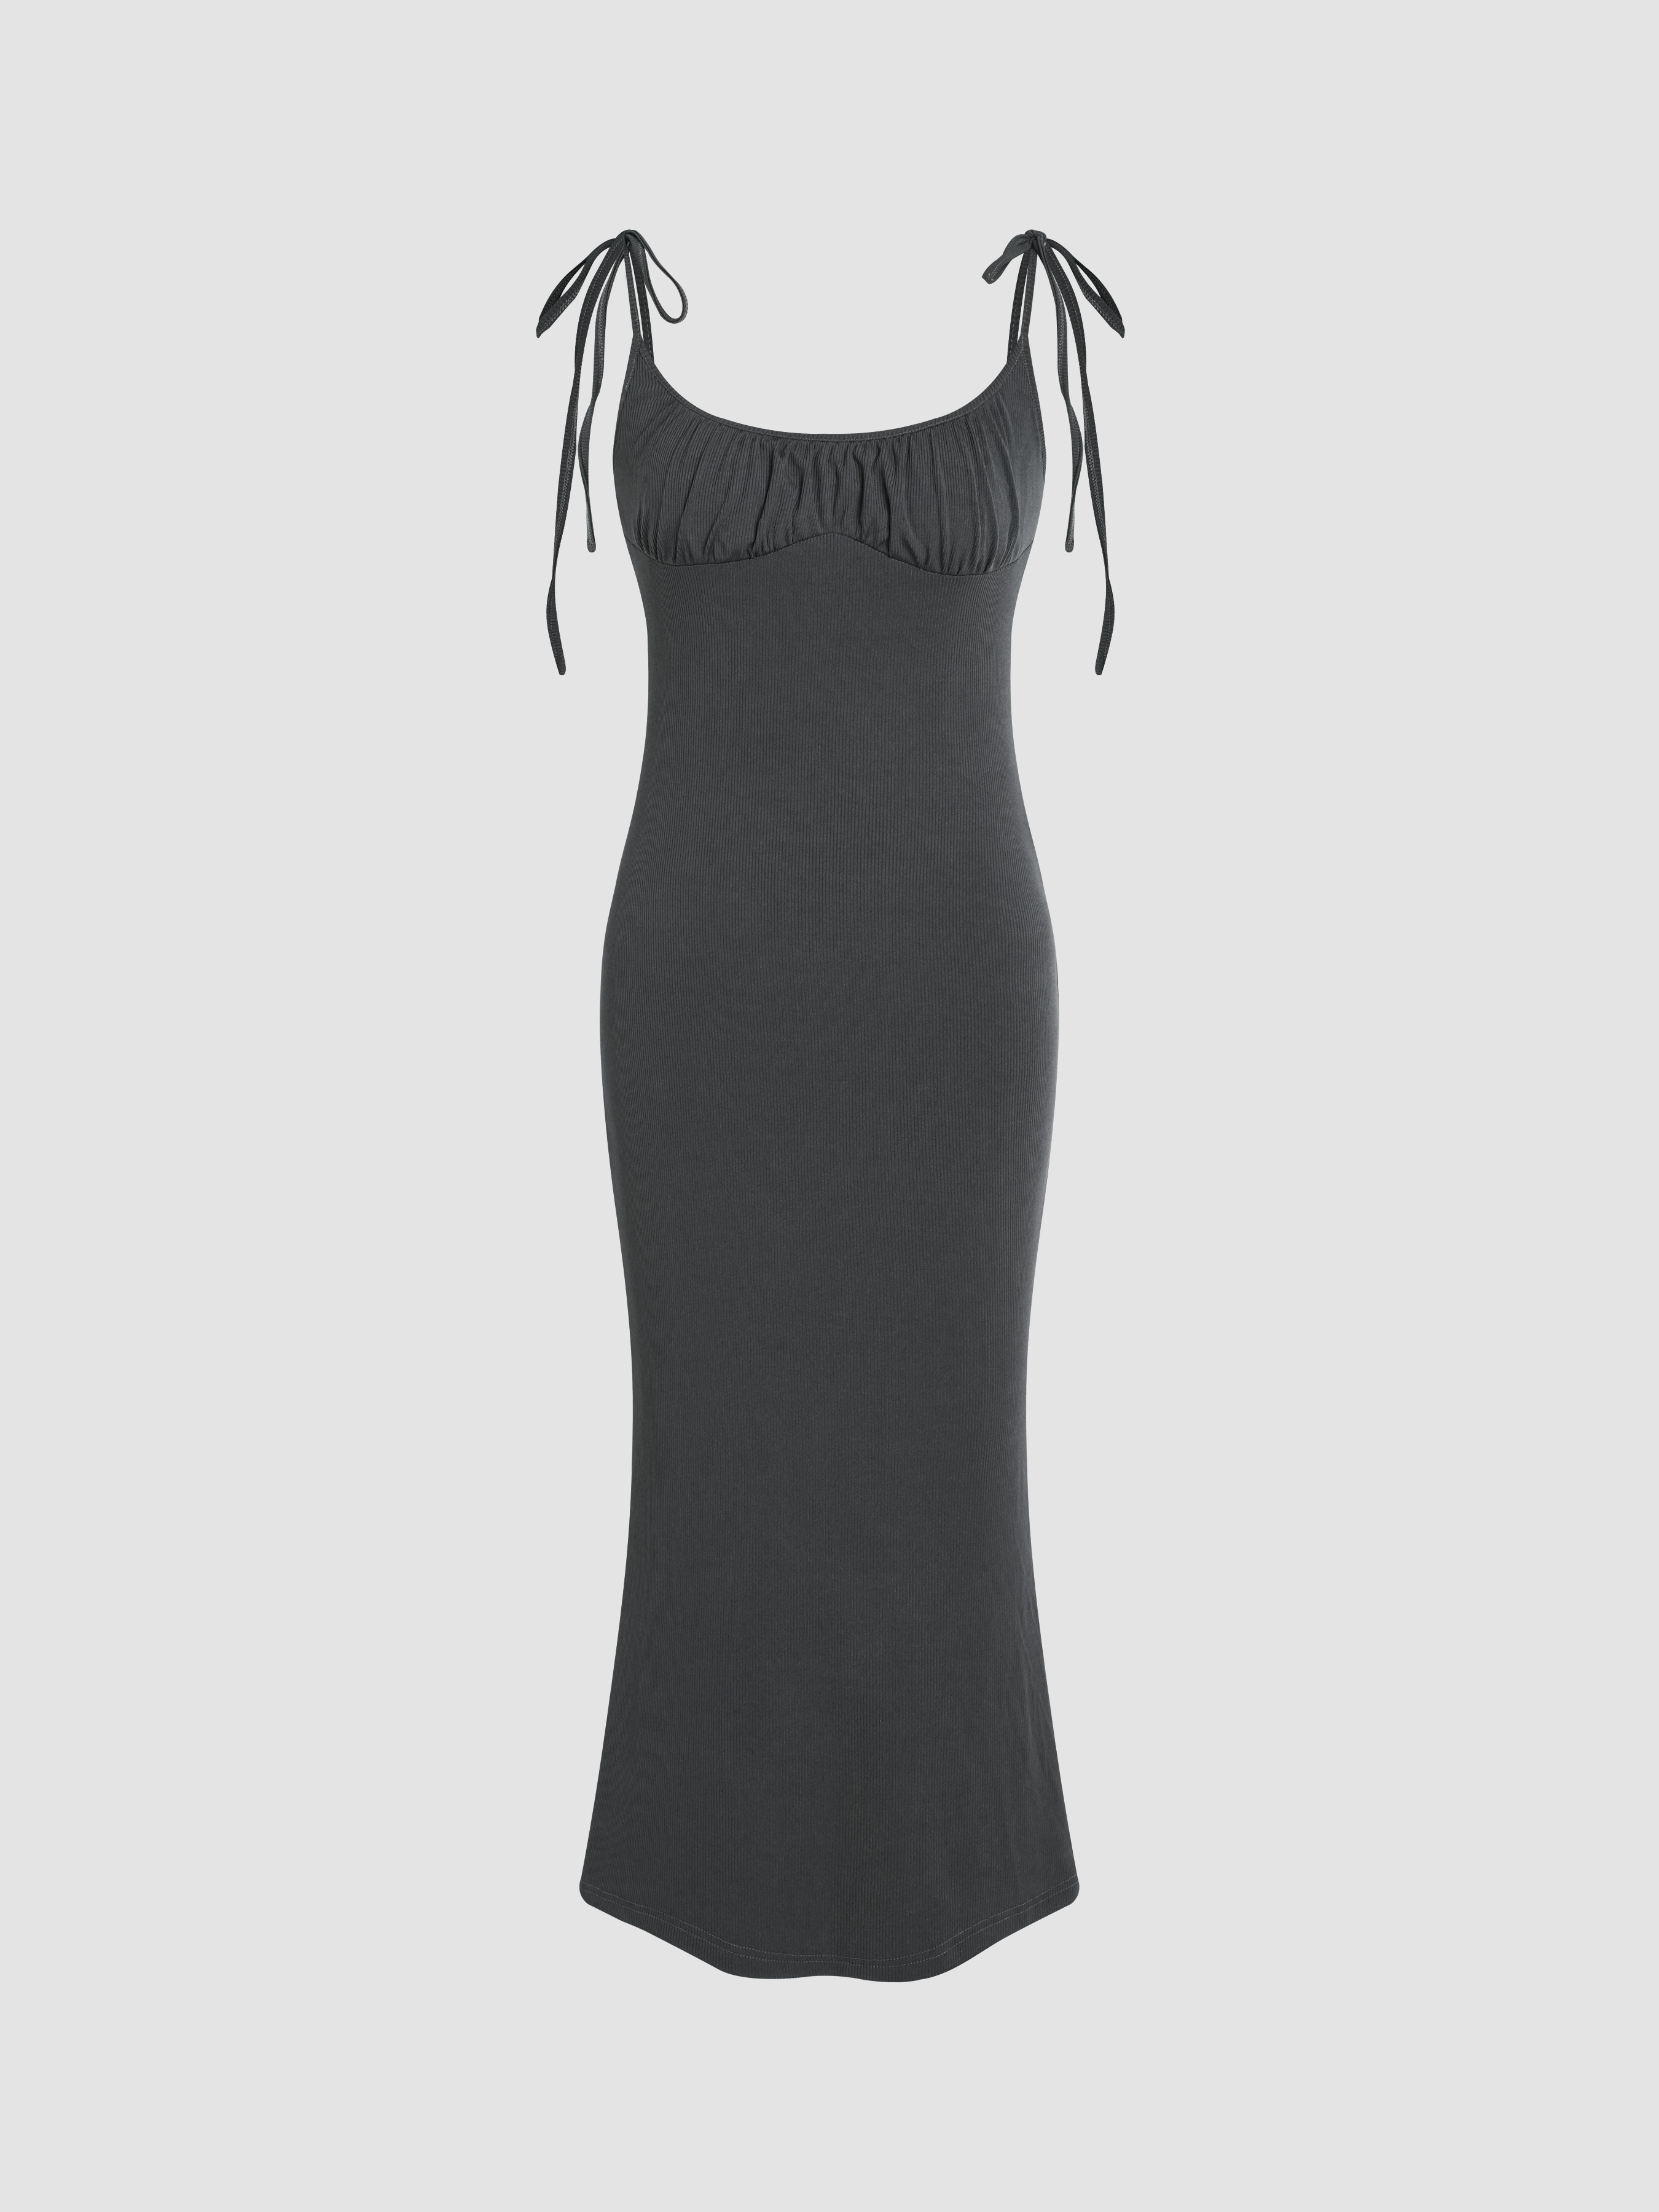 Ruched Knotted Mermaid Midi Dress - Cider